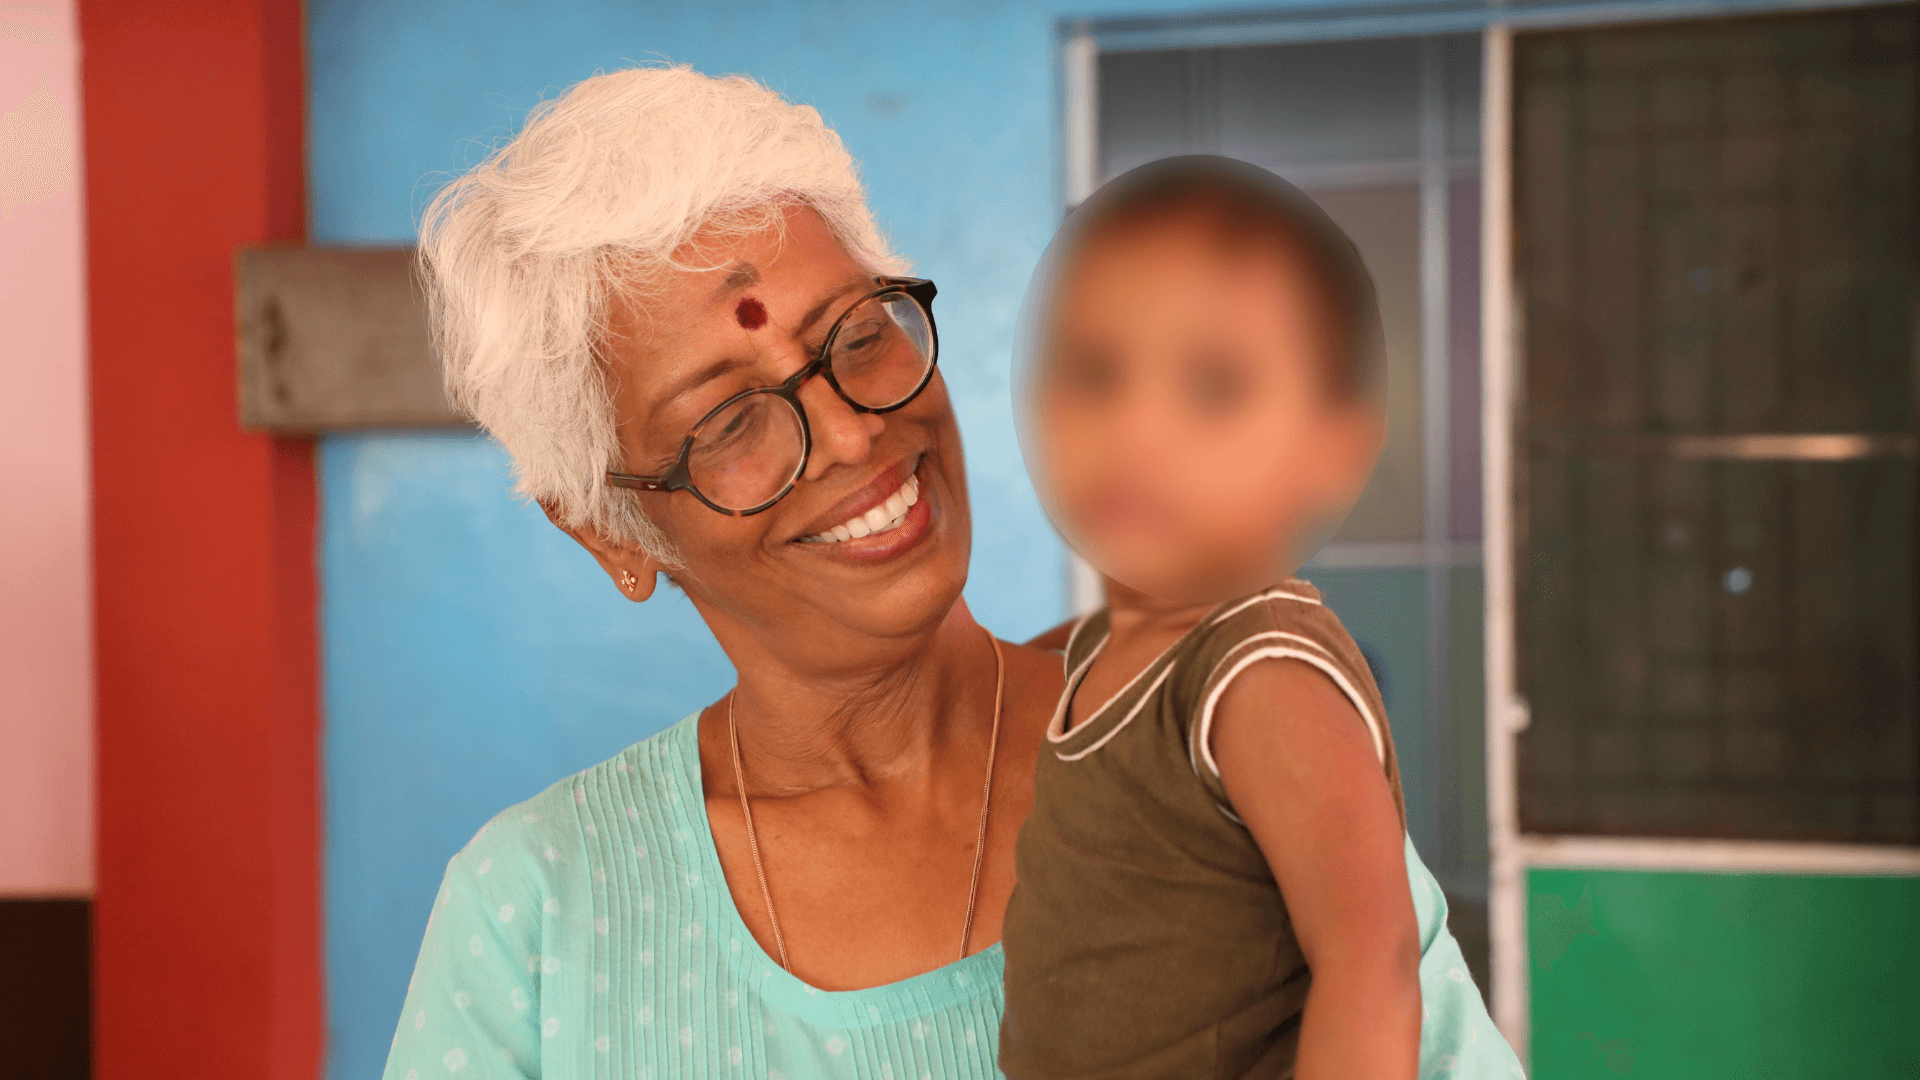 Vanitha Rengaraj's Sharanalayam is home to over 80 kids who have nobody in the world. Vanitha is their mother.